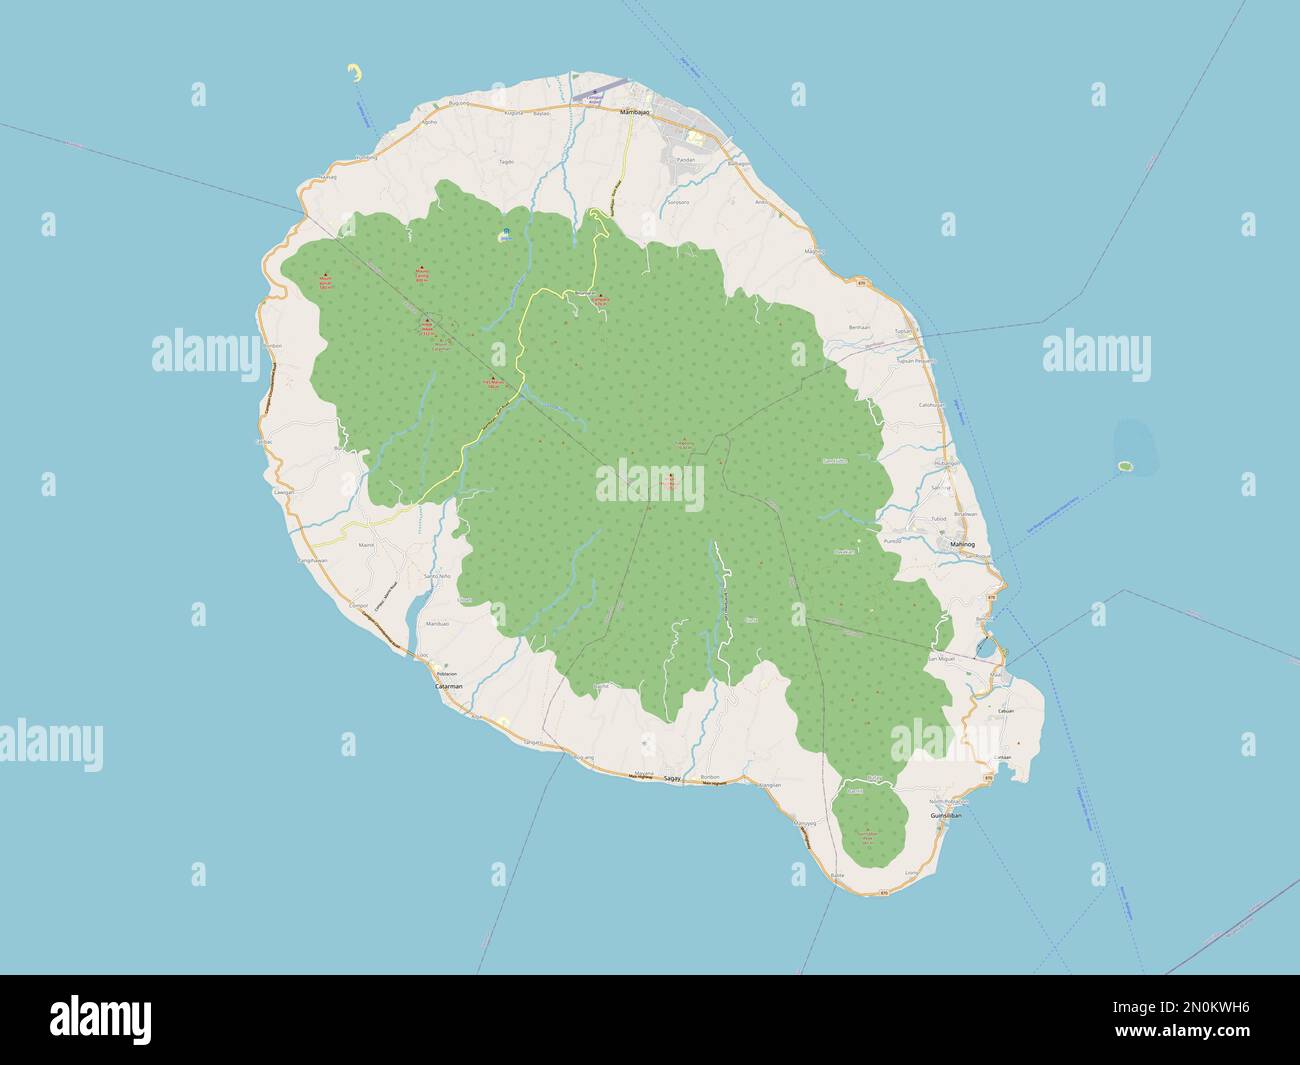 Camiguin, province of Philippines. Open Street Map Stock Photo